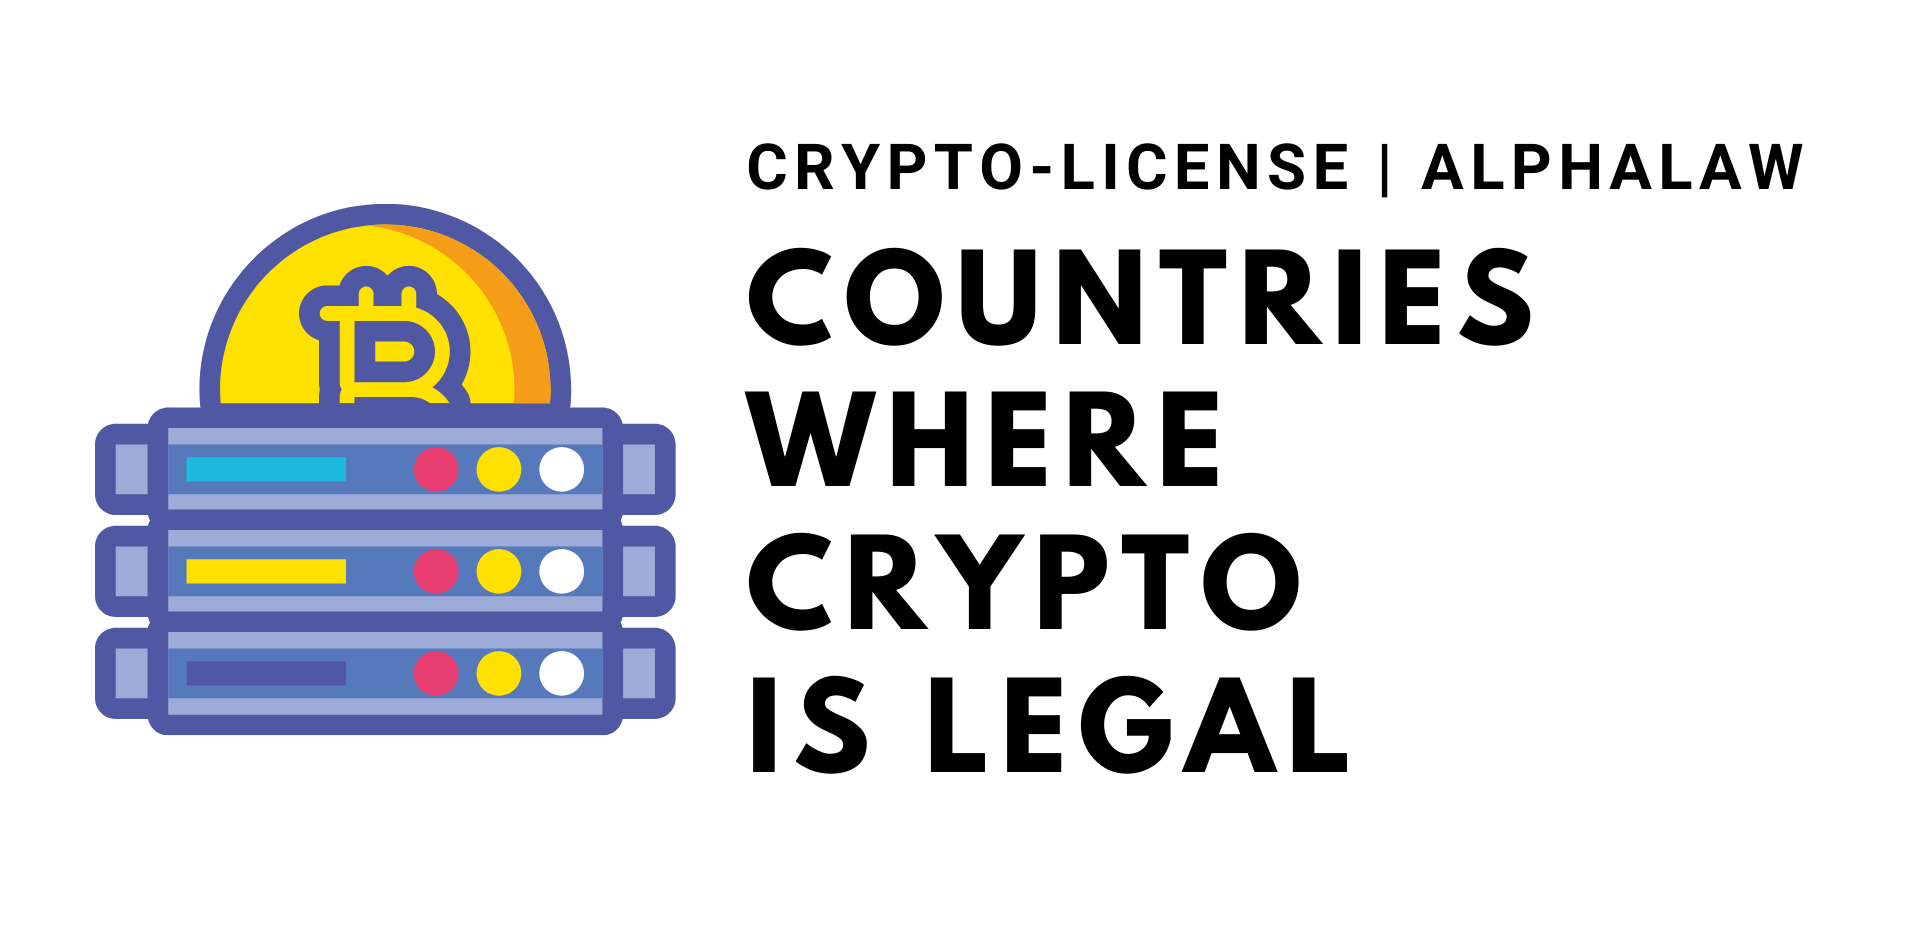 List of Countries where Cryptocurrency is Legal